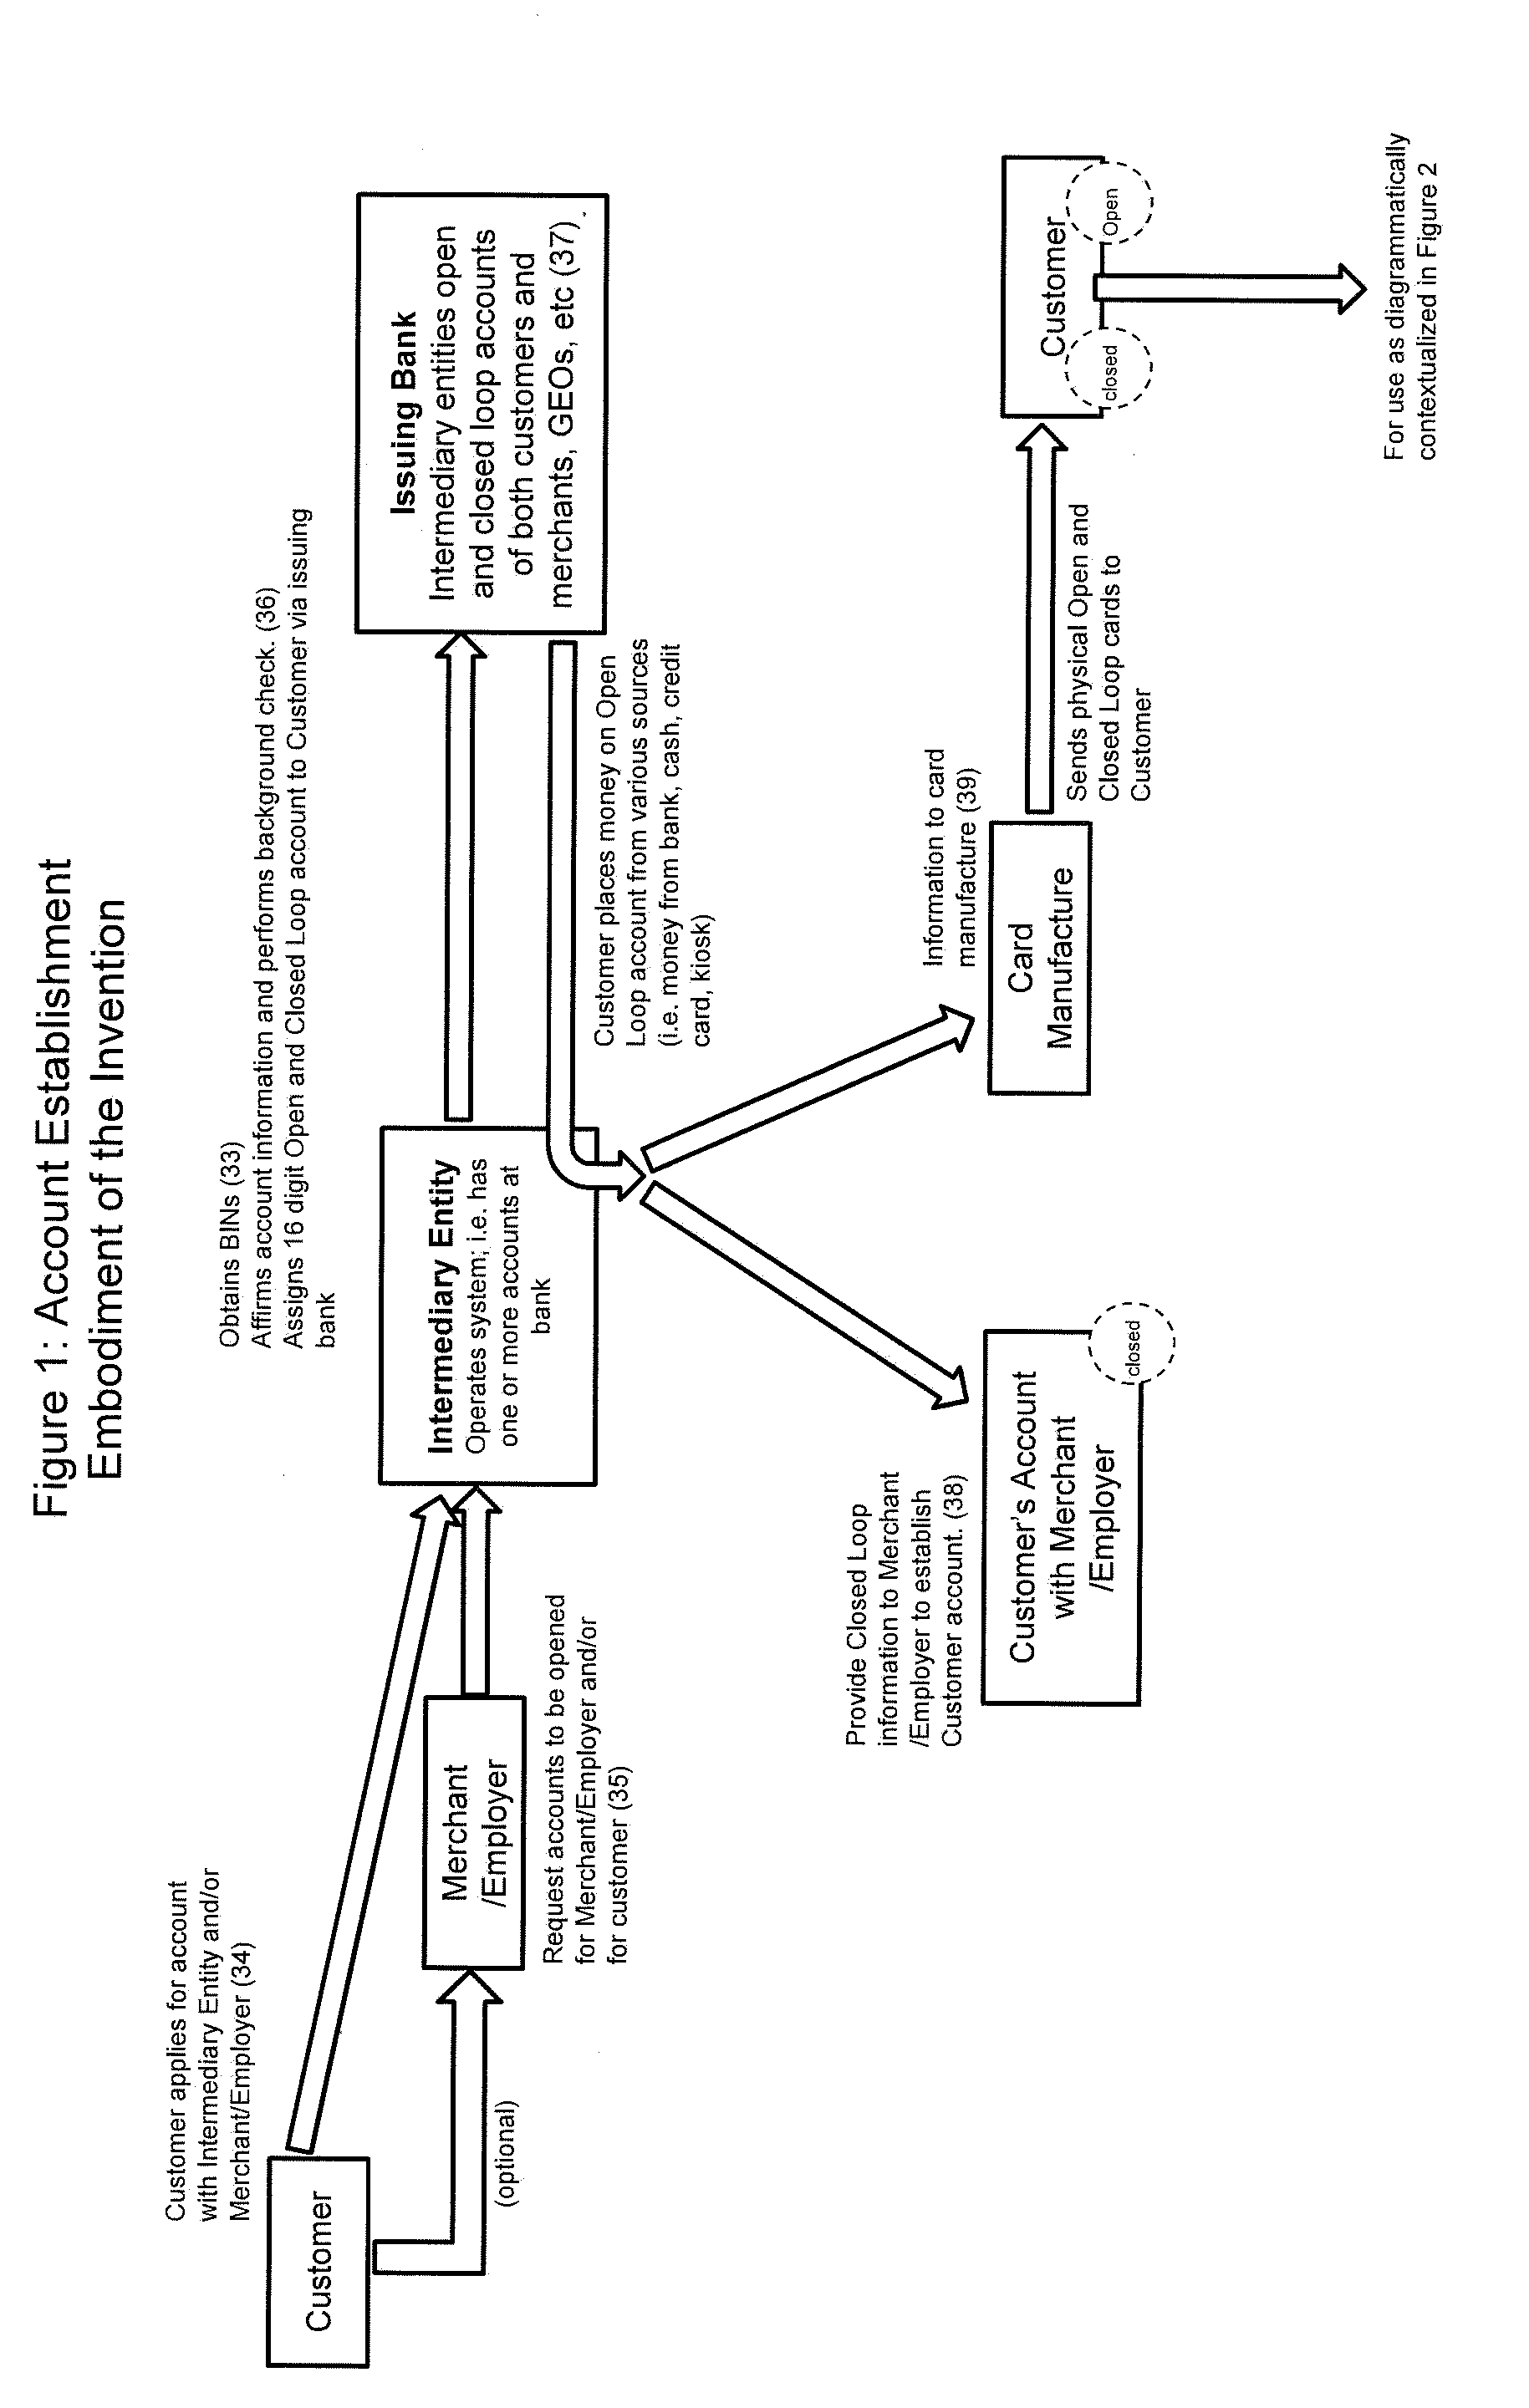 Intermediary payment and escrow system and method